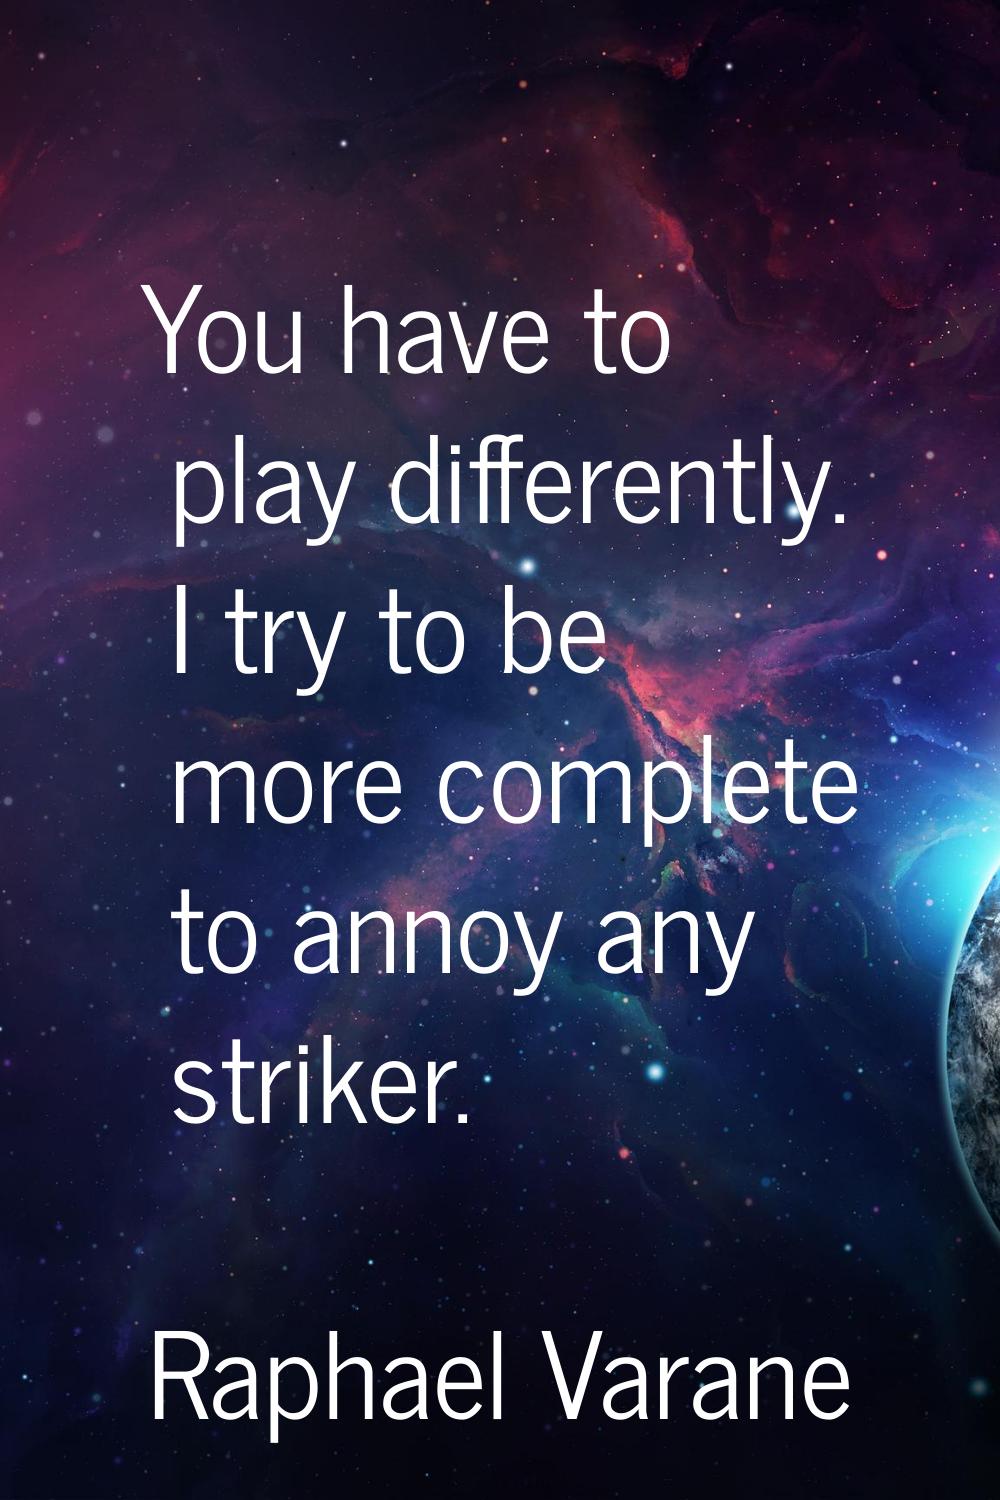 You have to play differently. I try to be more complete to annoy any striker.